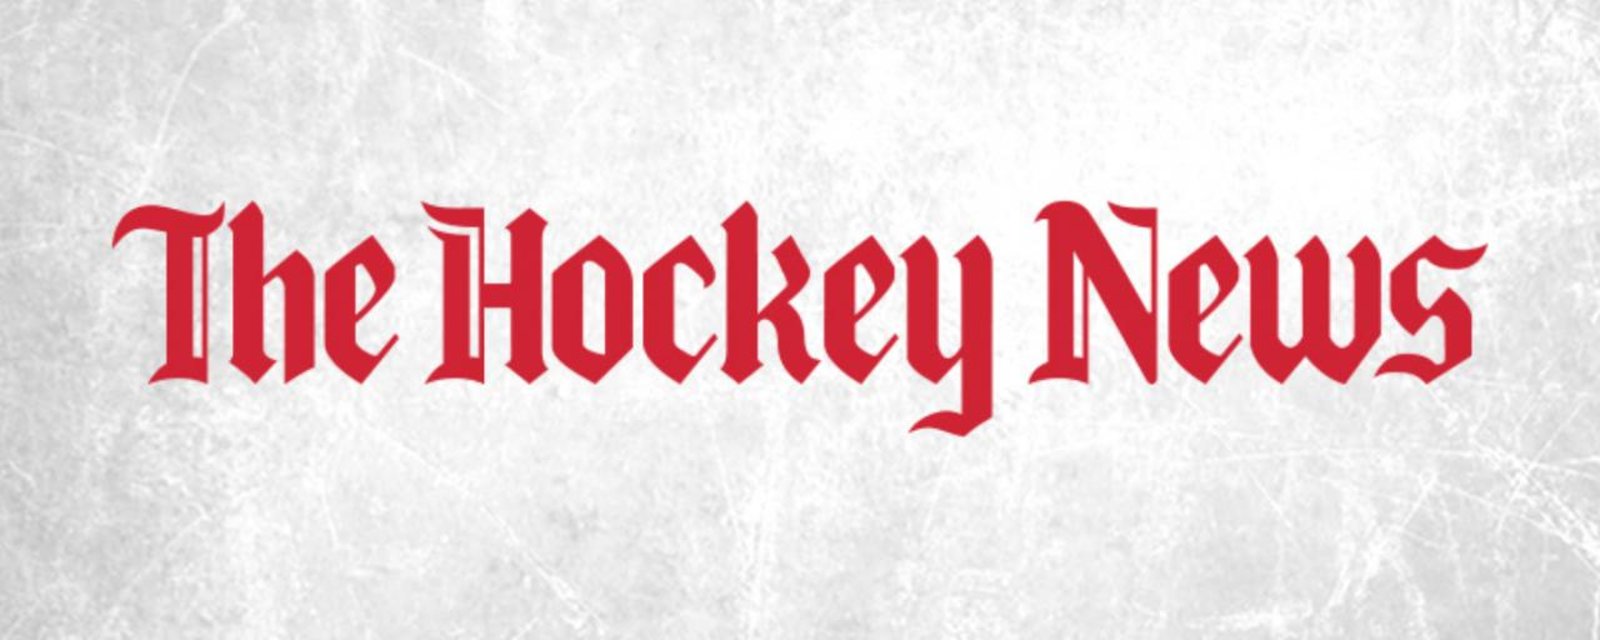 The staff of The Hockey News gets laid off during coronavirus crisis! 